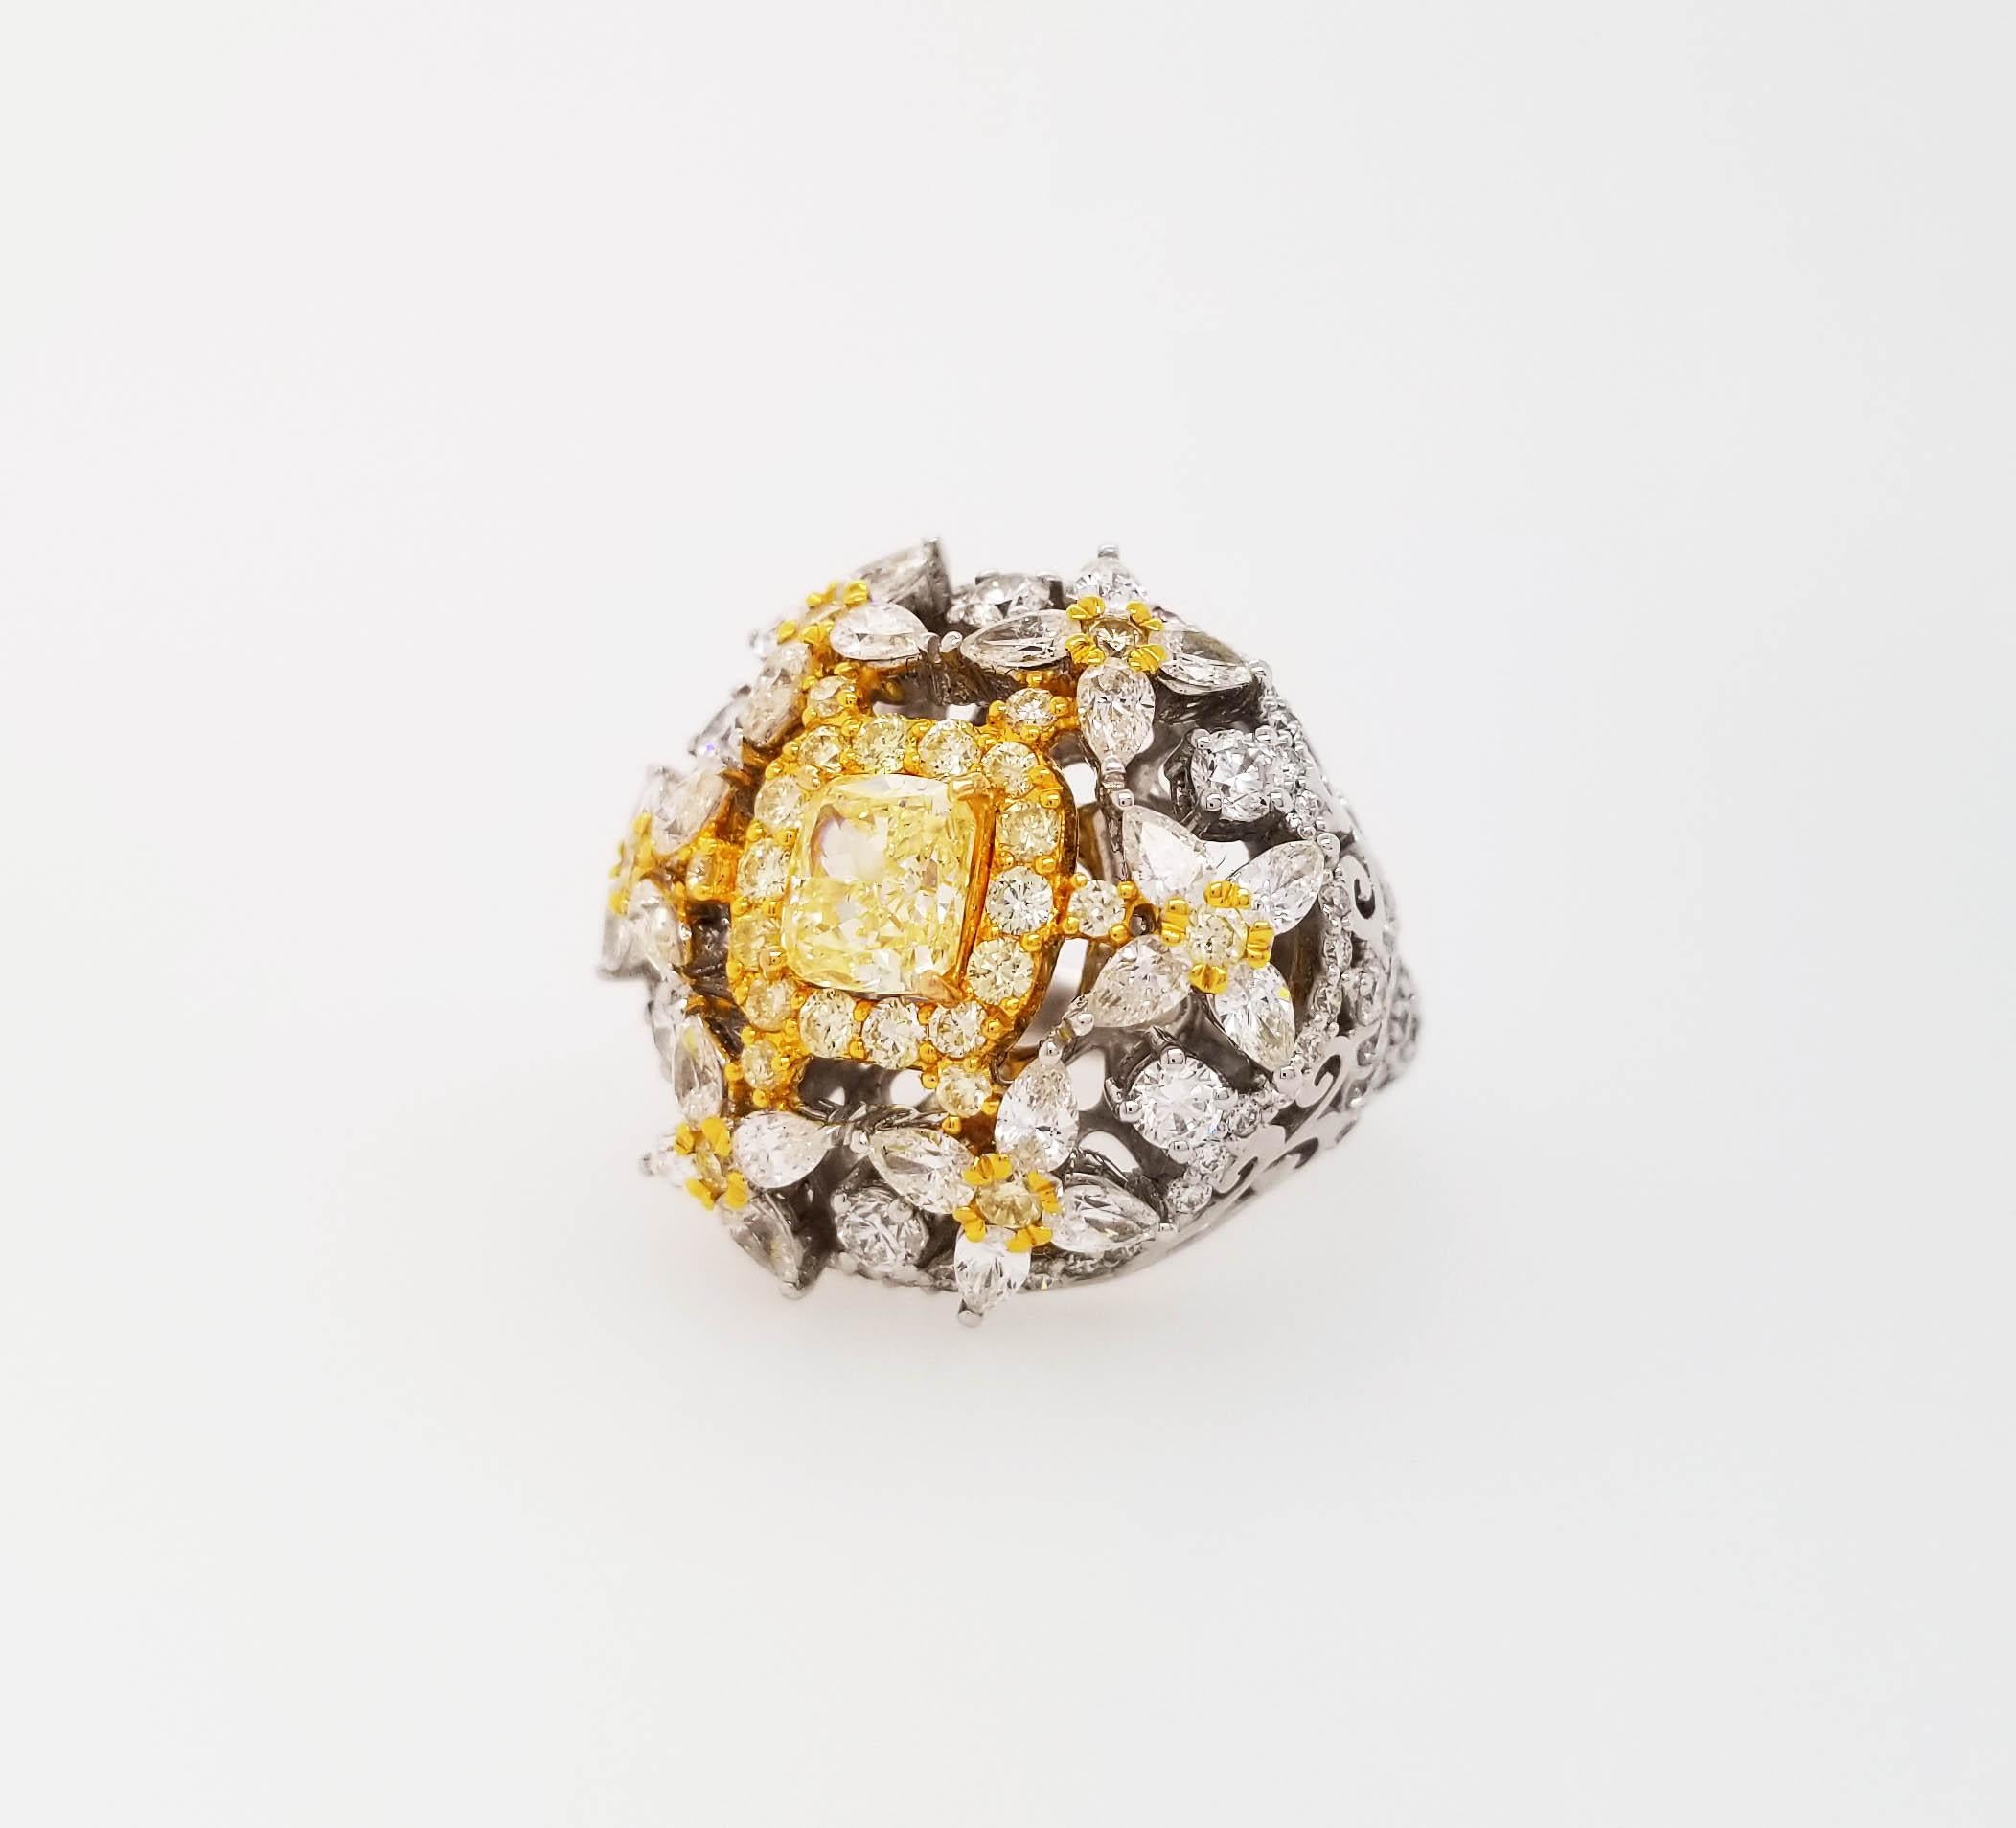 Contemporary Scarselli Cocktail Ring with 1.00 Carat Fancy Yellow Radiant Diamonds GIA